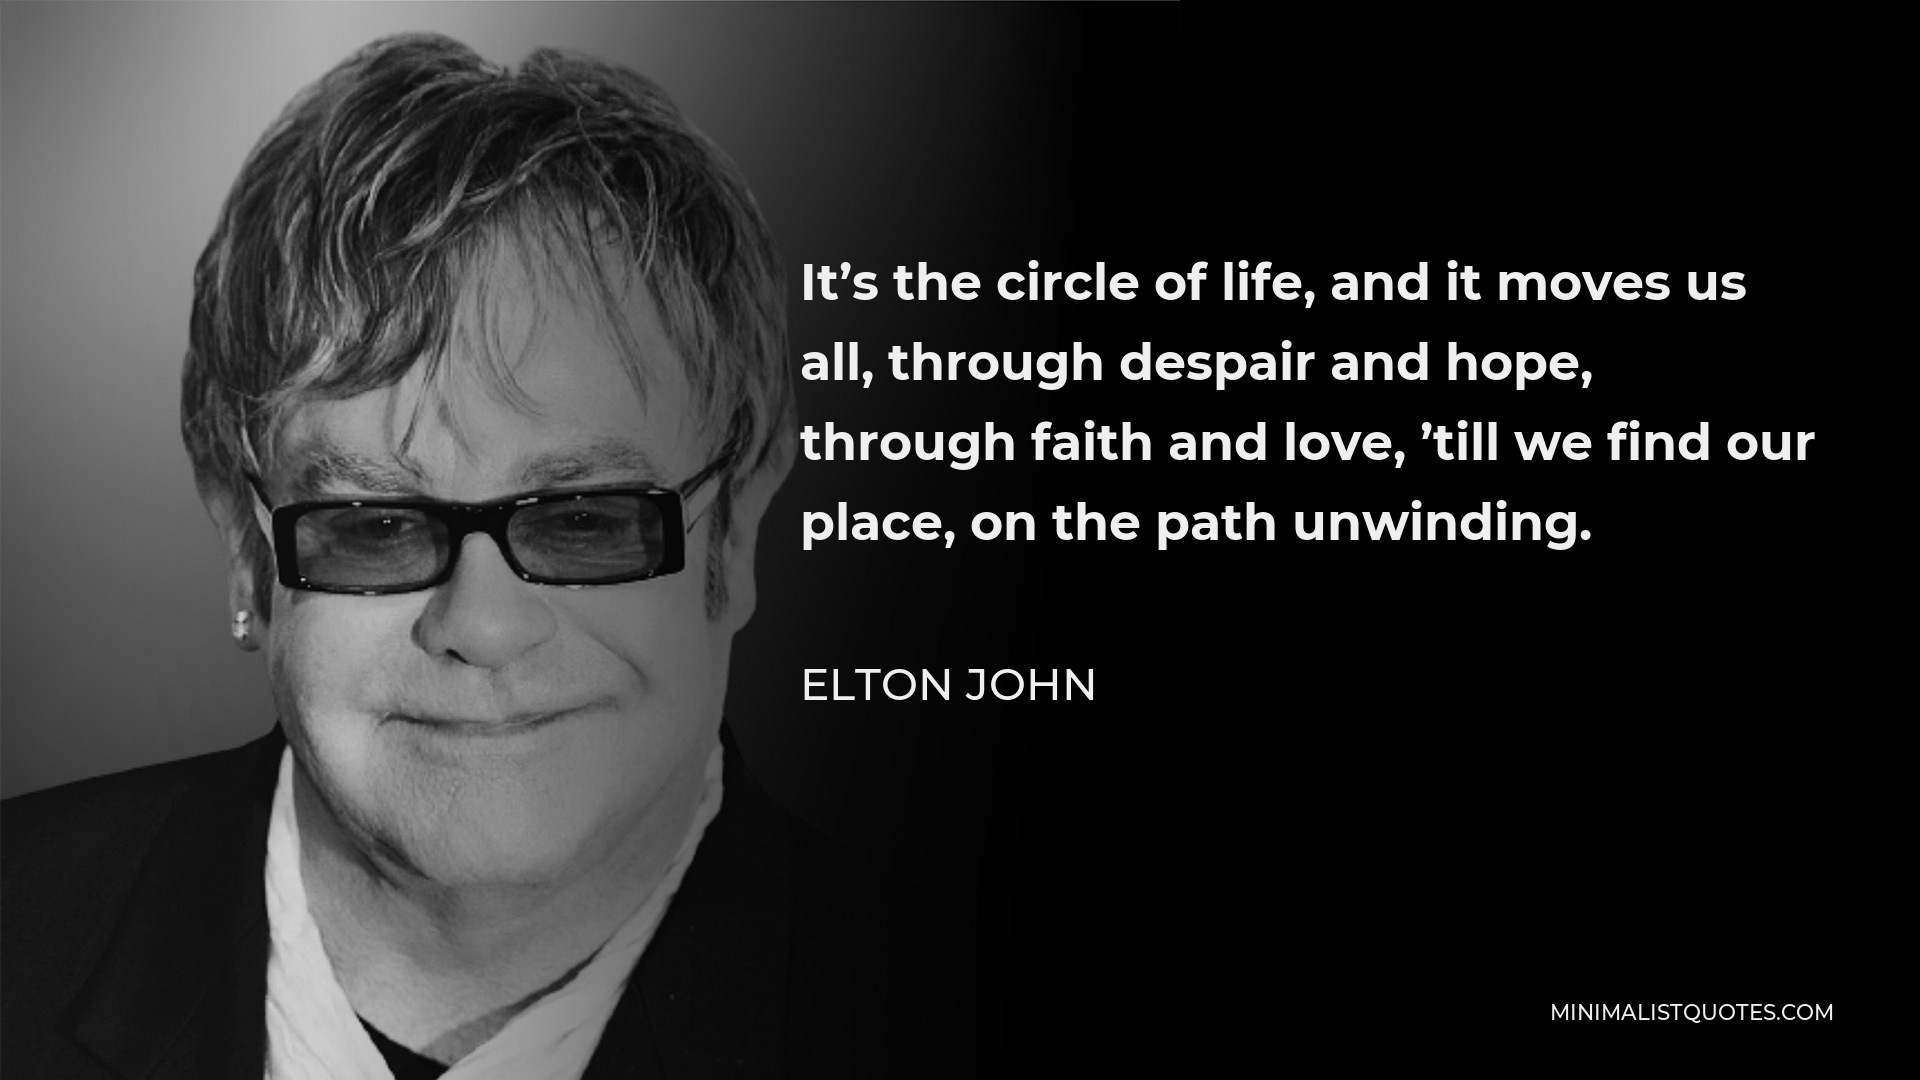 Elton John Quote - It’s the circle of life, and it moves us all, through despair and hope, through faith and love, ’till we find our place, on the path unwinding.